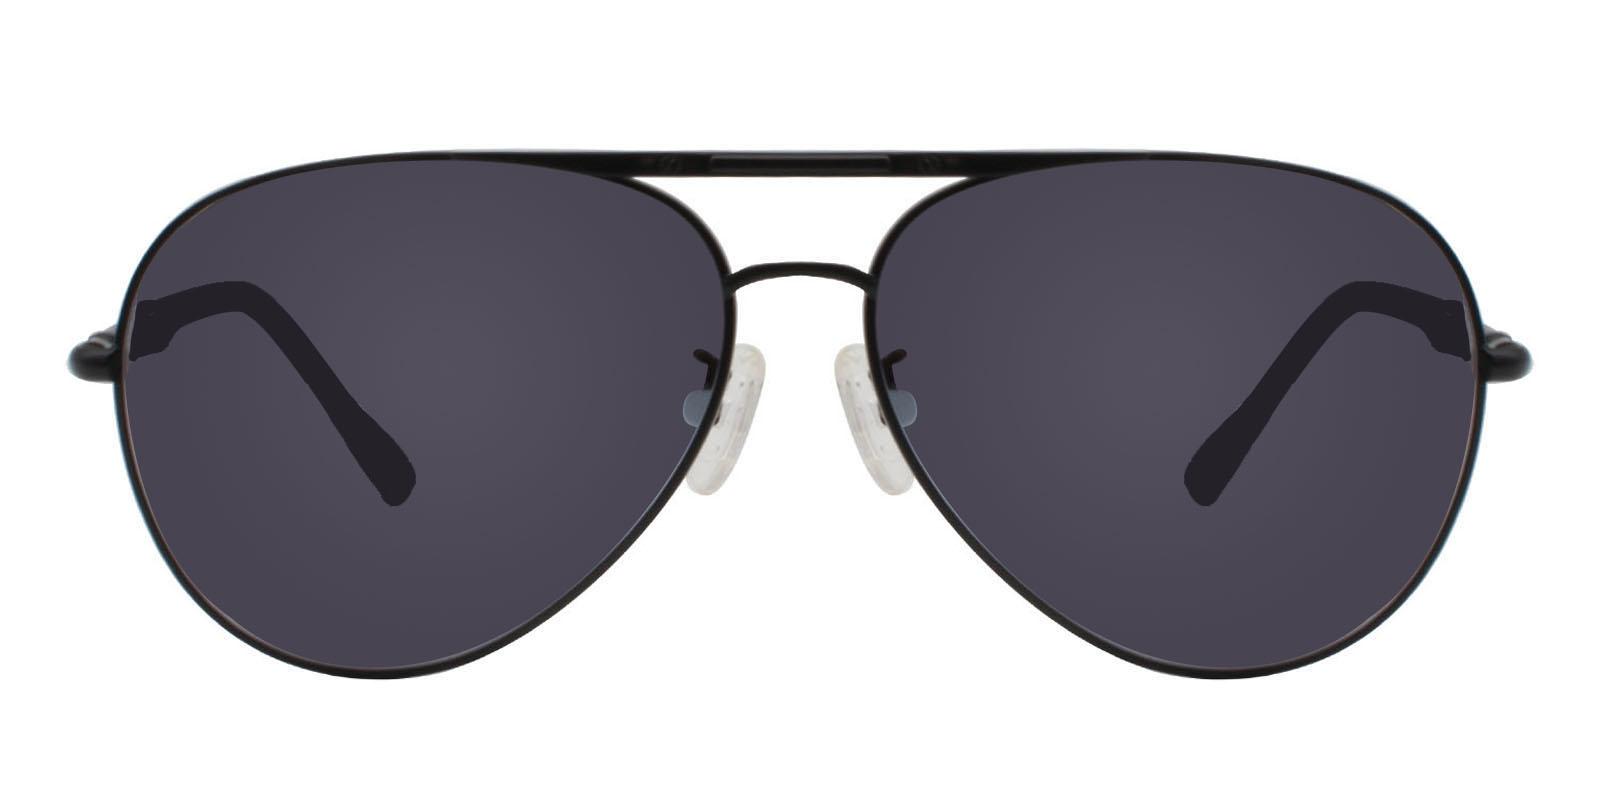 Edie Black Metal NosePads , Sunglasses Frames from ABBE Glasses